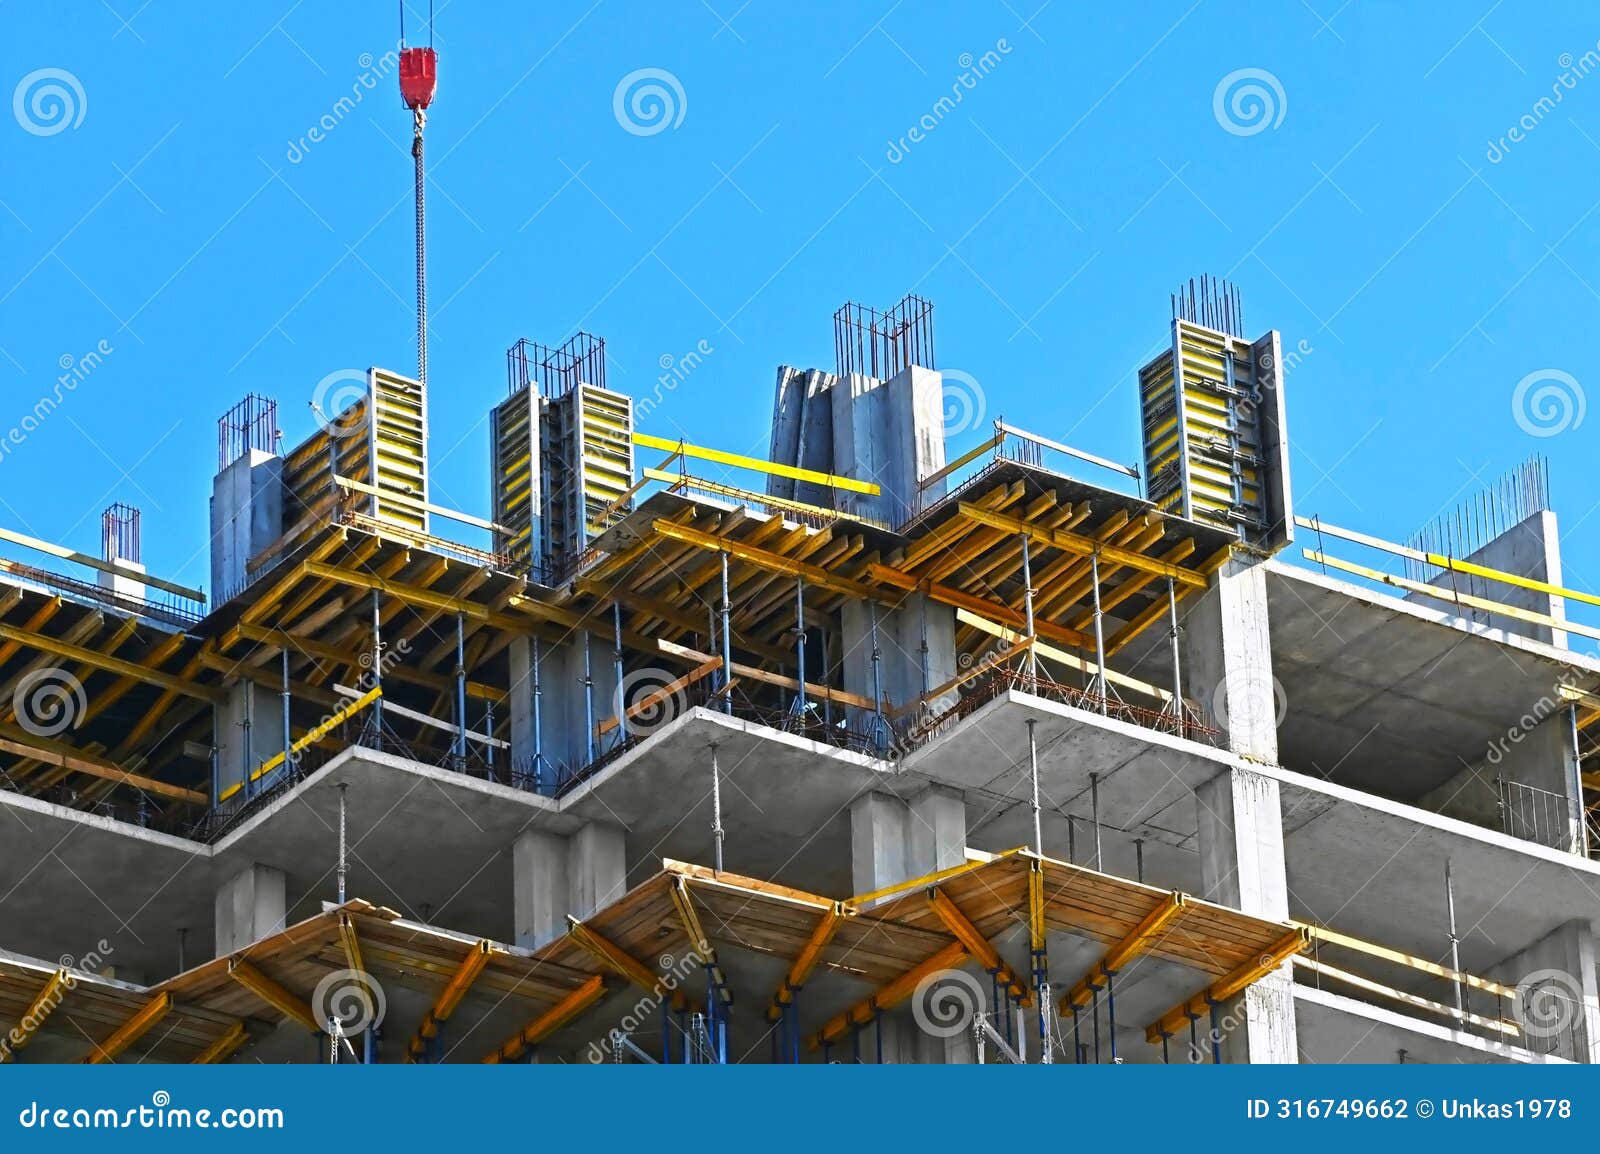 construction site with formwork